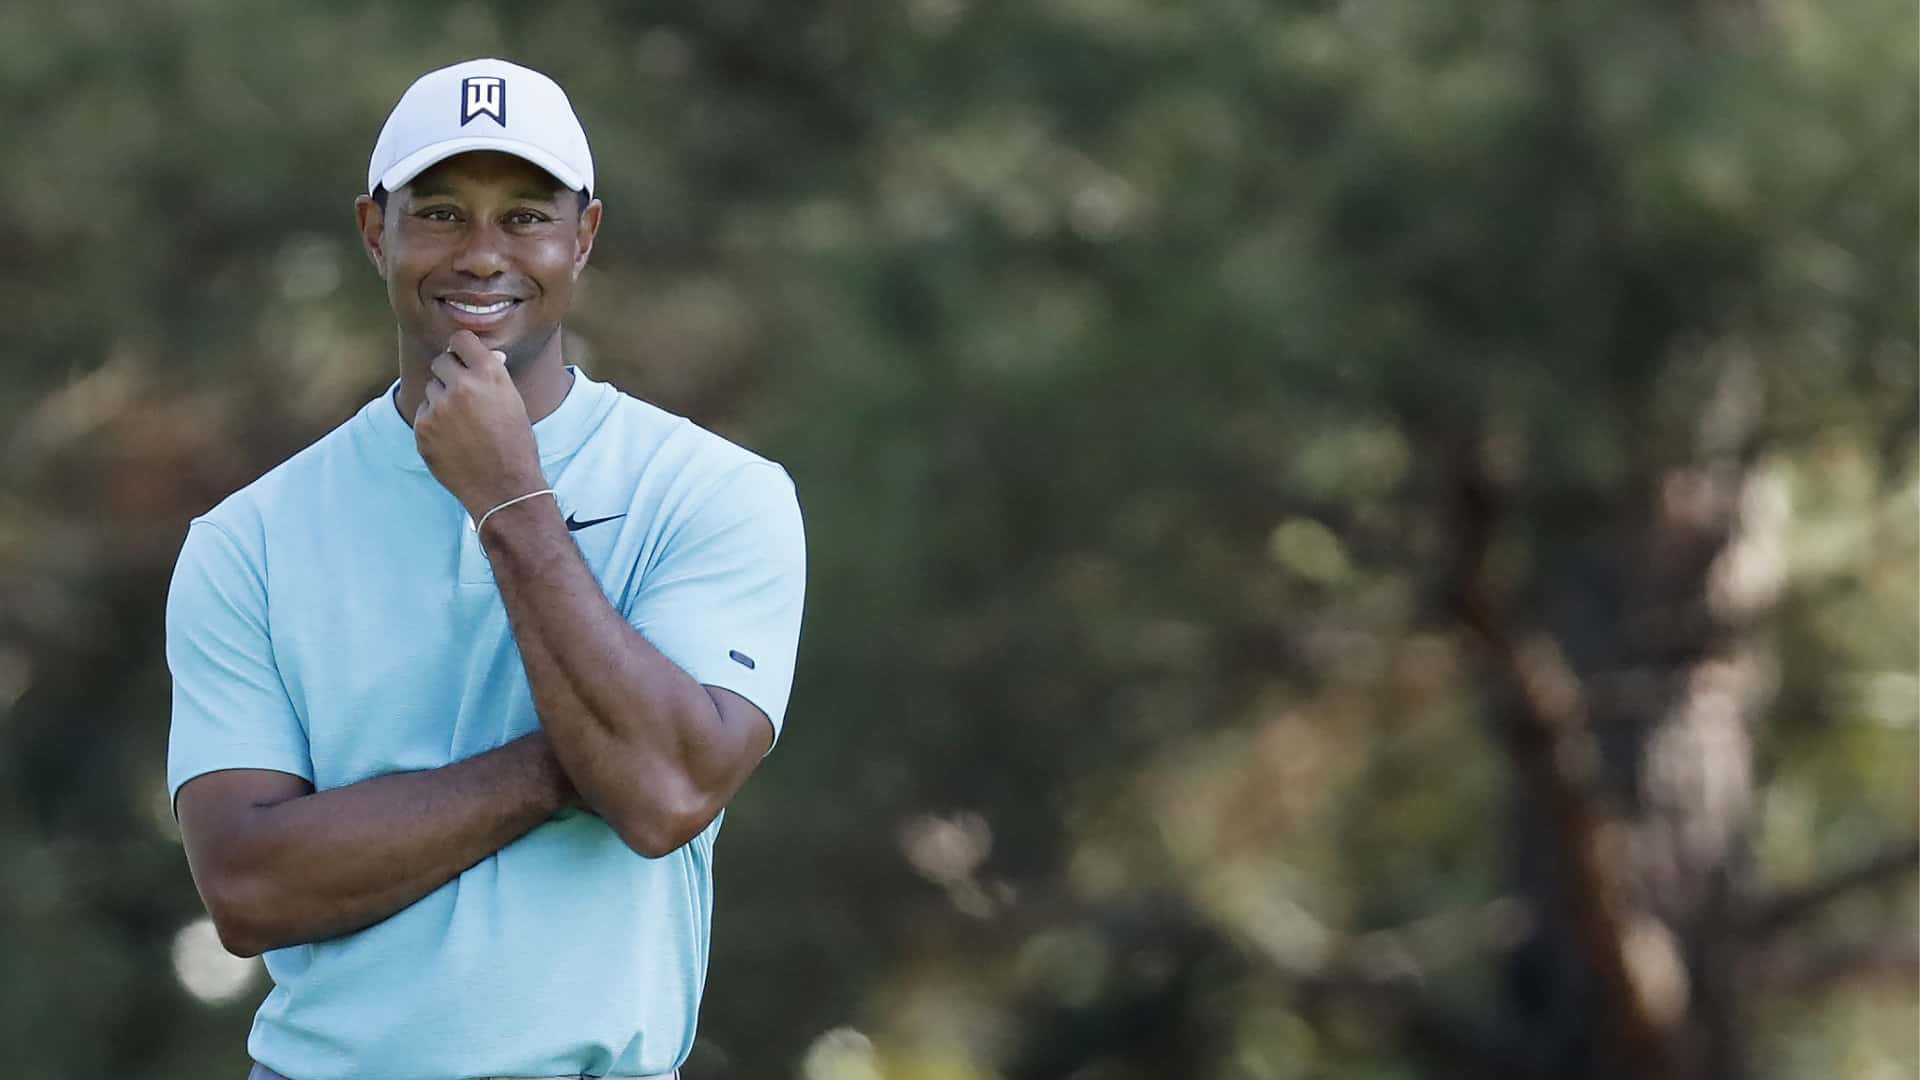 Tiger Woods Cardboard Cutout / Tiger Woods awake in hospital after suffering multiple ... - Max homa stands with the trophy and tournament host tiger woods at the 2021 genesis invitational at riviera country club on february 21, 2021 in pacific palisades, california.